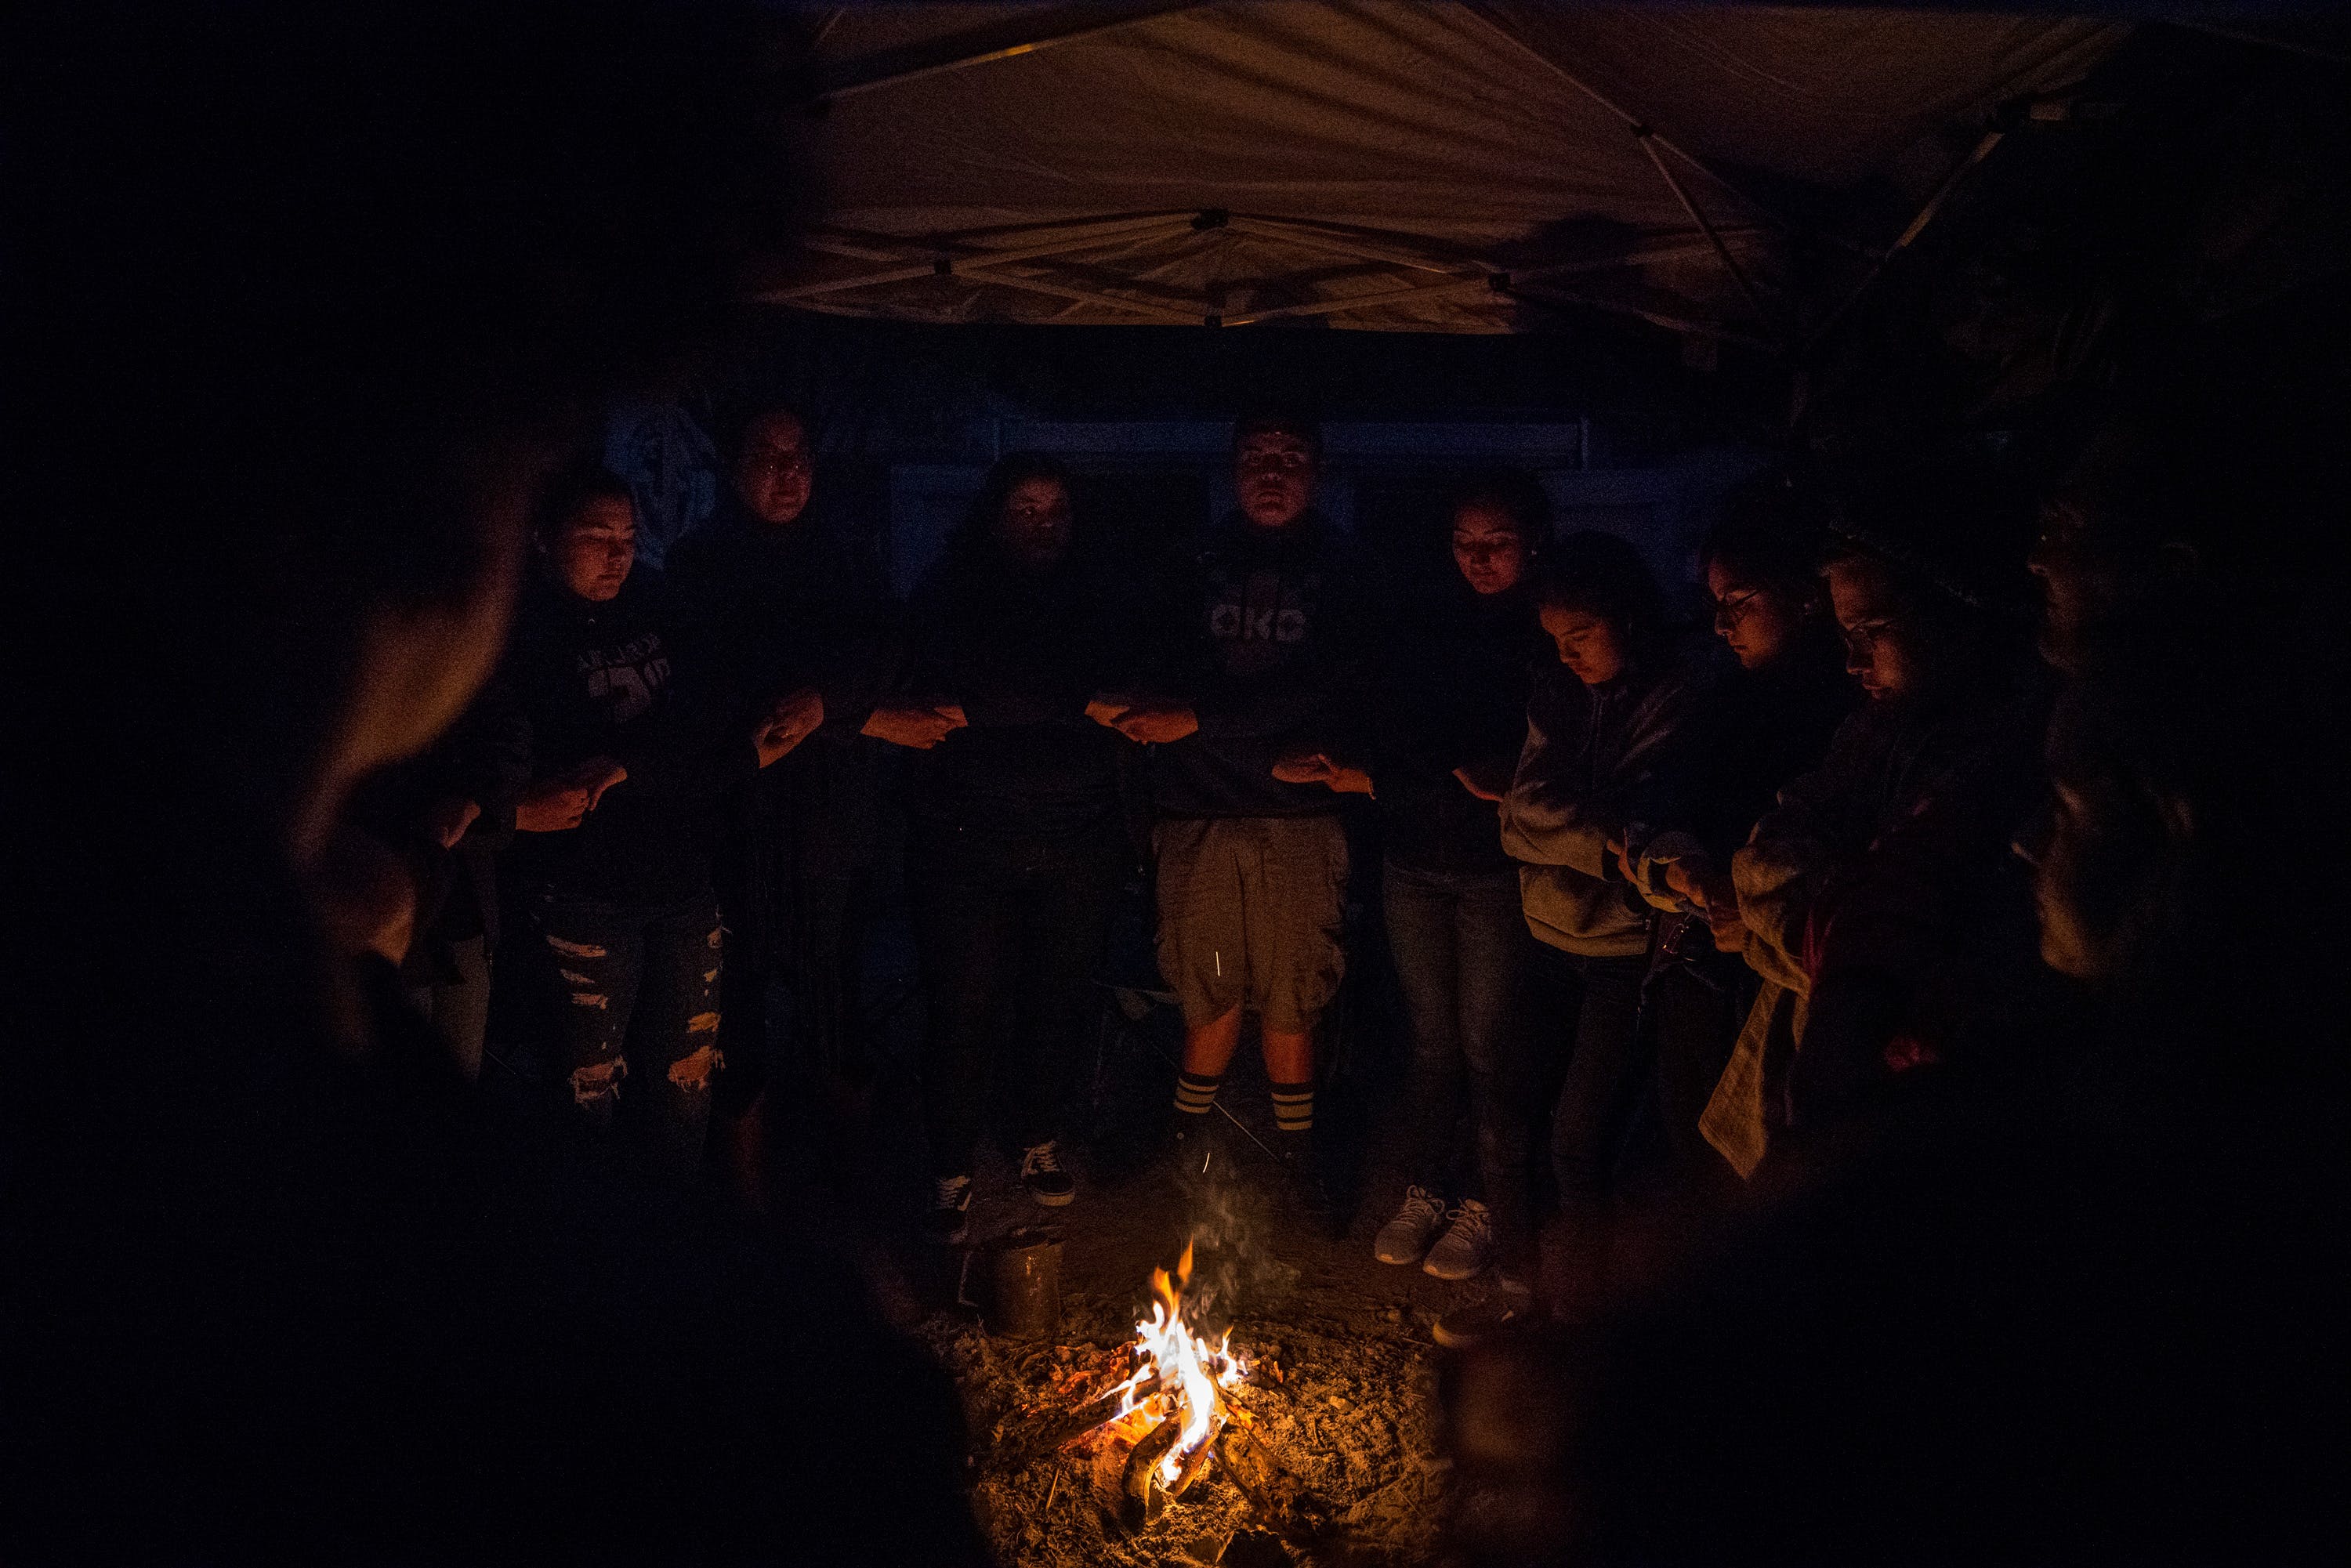 “Al Exito” members along with Carrizo/Comecrudo Tribe members, and activists gather around the fire to share things that they are thankful for at Yalui Village in Hidalgo County, Texas on March 17, 2019.Photo: Verónica G. Cárdenas for The Intercept